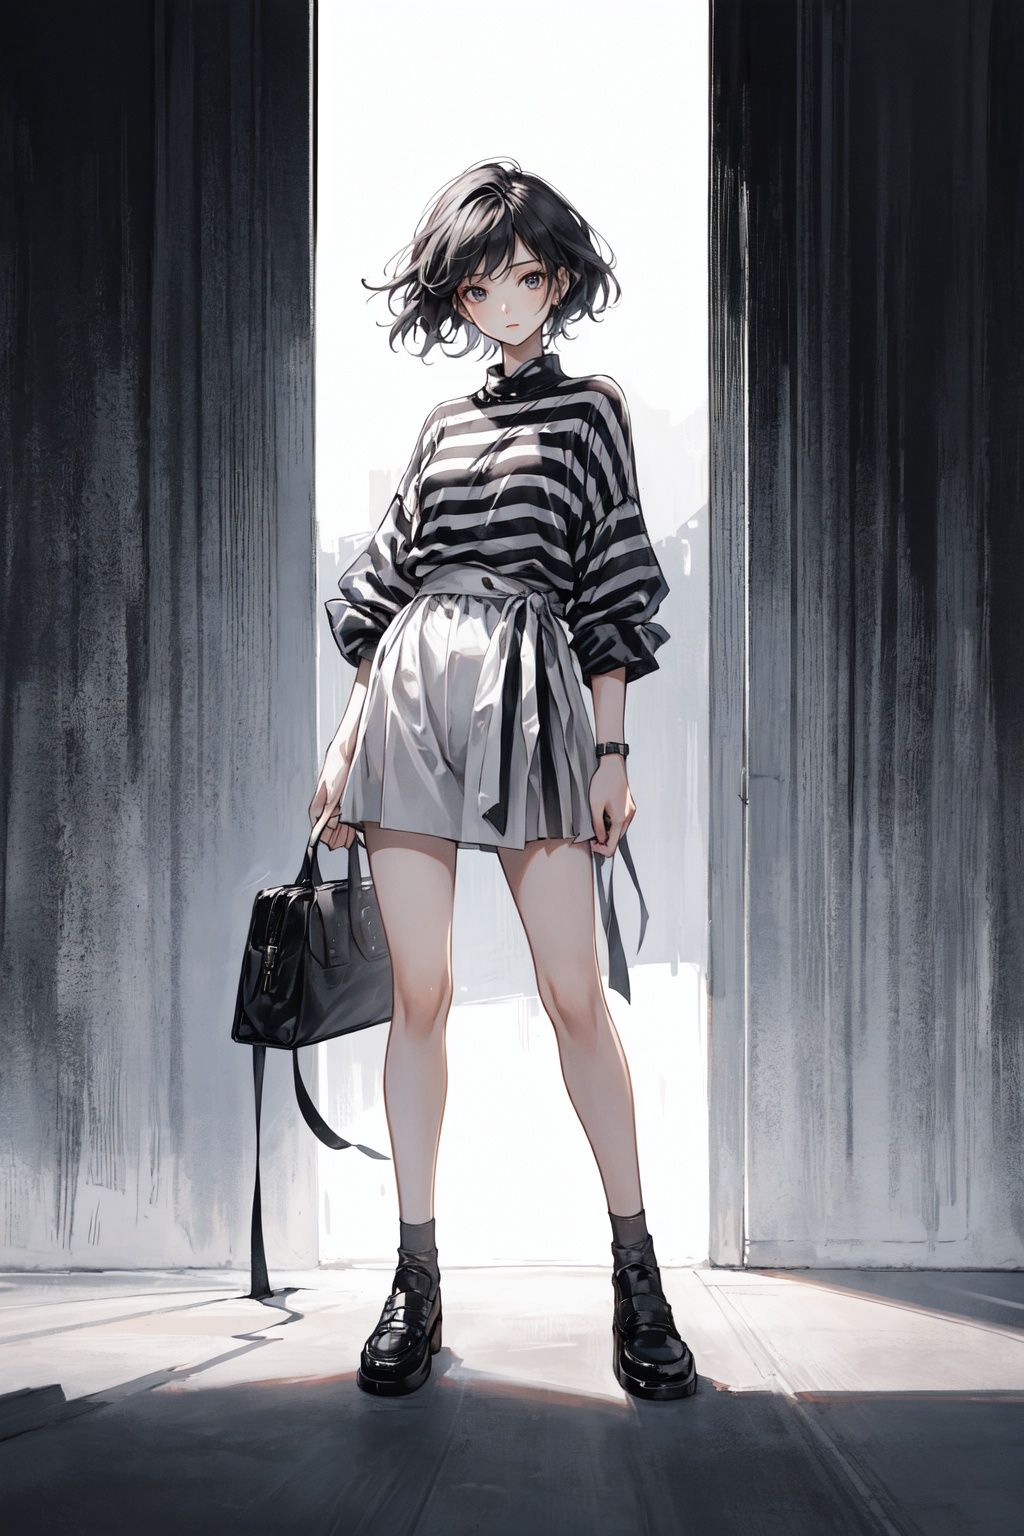  A HongKong style about 23 years old young girl, full body ,She is dressed in a Black striped shirt, white background , emphasizing the play of light and shadow, highlighting intricate details,It is available in both 4K and high-definition resolutions,Wuqiii,Wumag